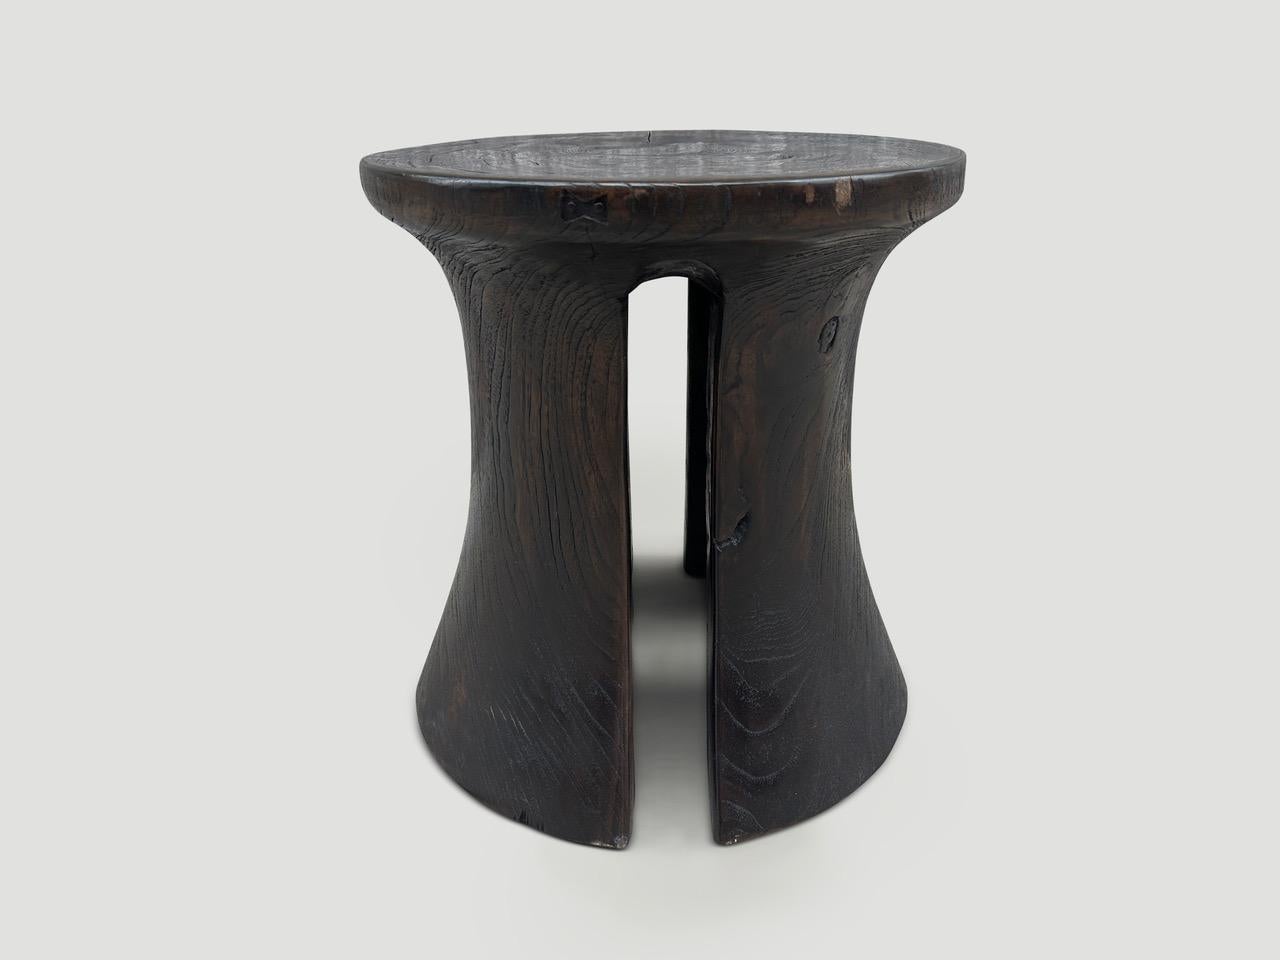 A century old teak wood mortar originally used to grind rice, is repurposed into this minimalist side table or stool. We first turned it upside down and smoothed out the entire piece then added sleek cut outs on the sides with small butterfly inlays